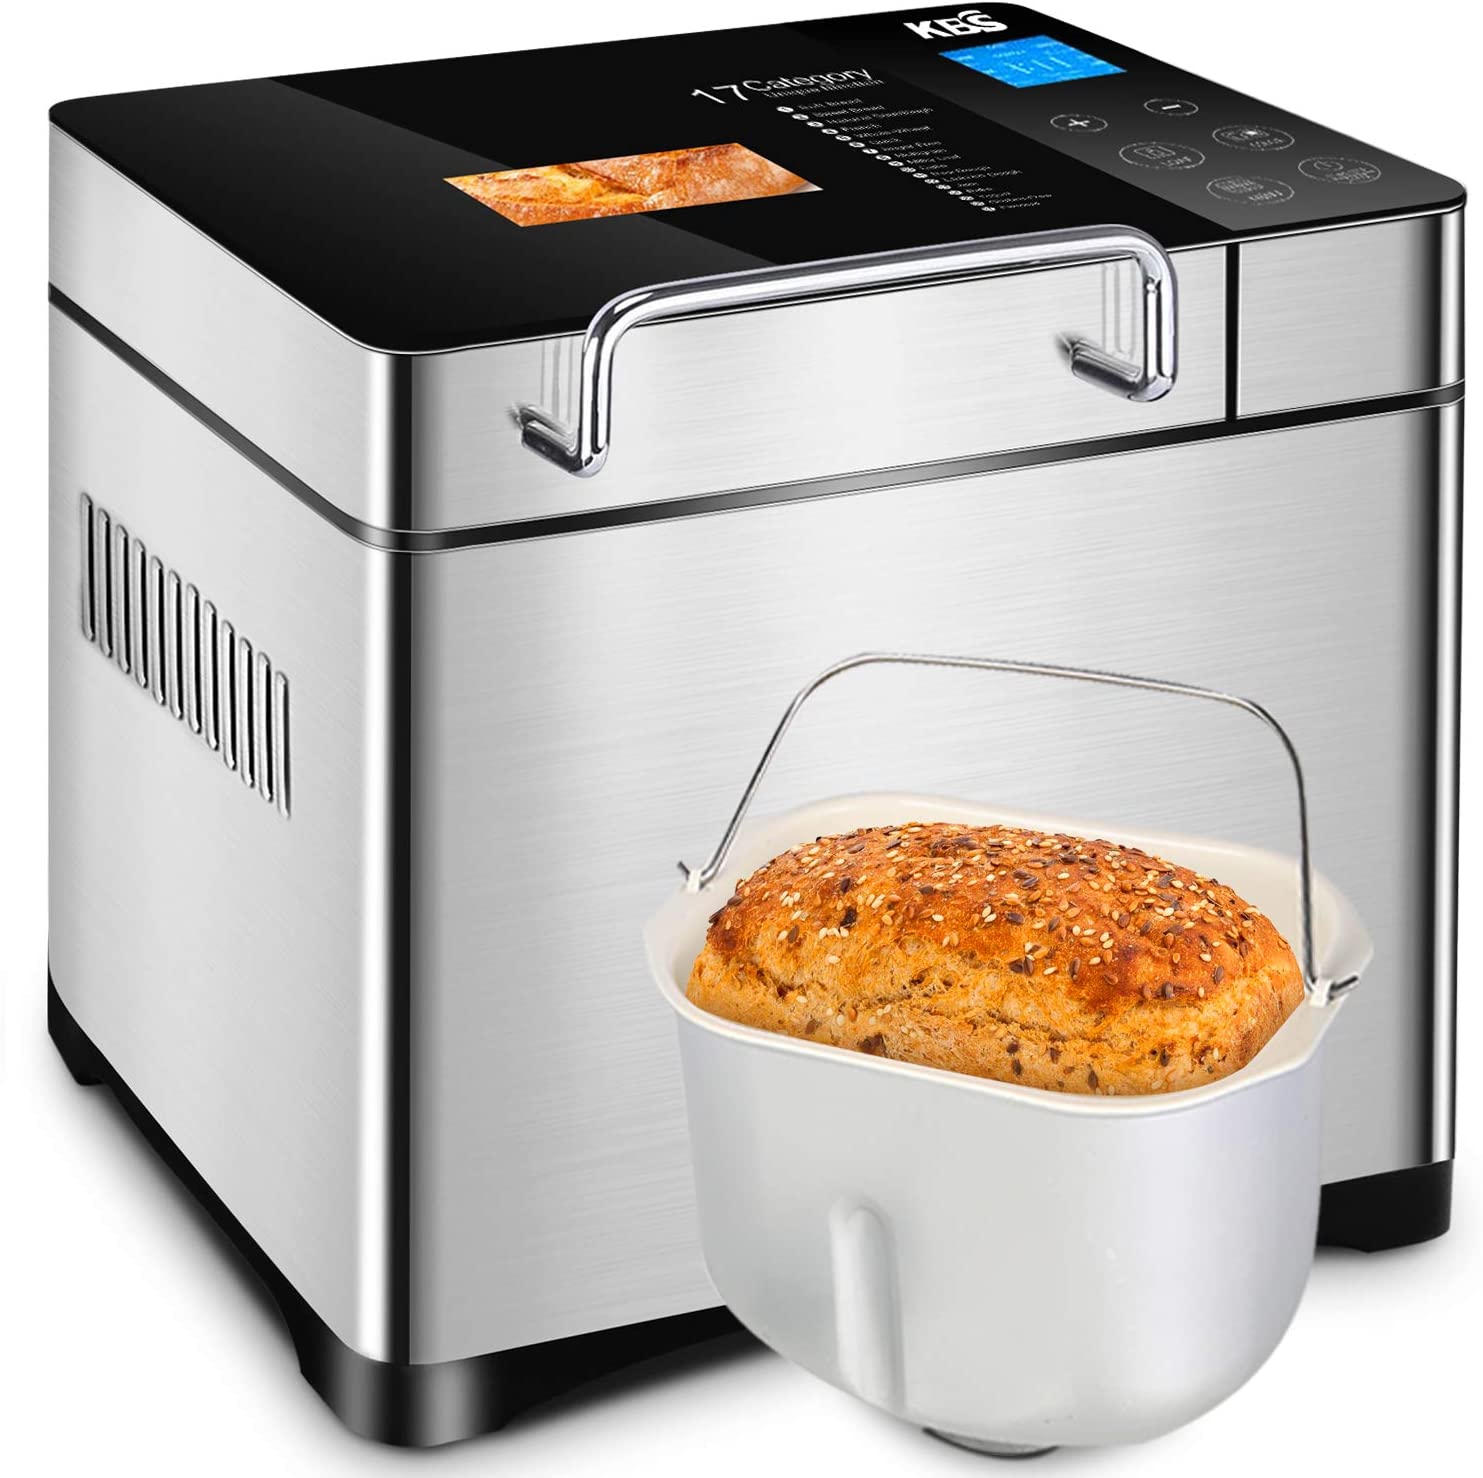 Top 10 Best Bread Makers in 2022 Reviews - Top Best Pro Review